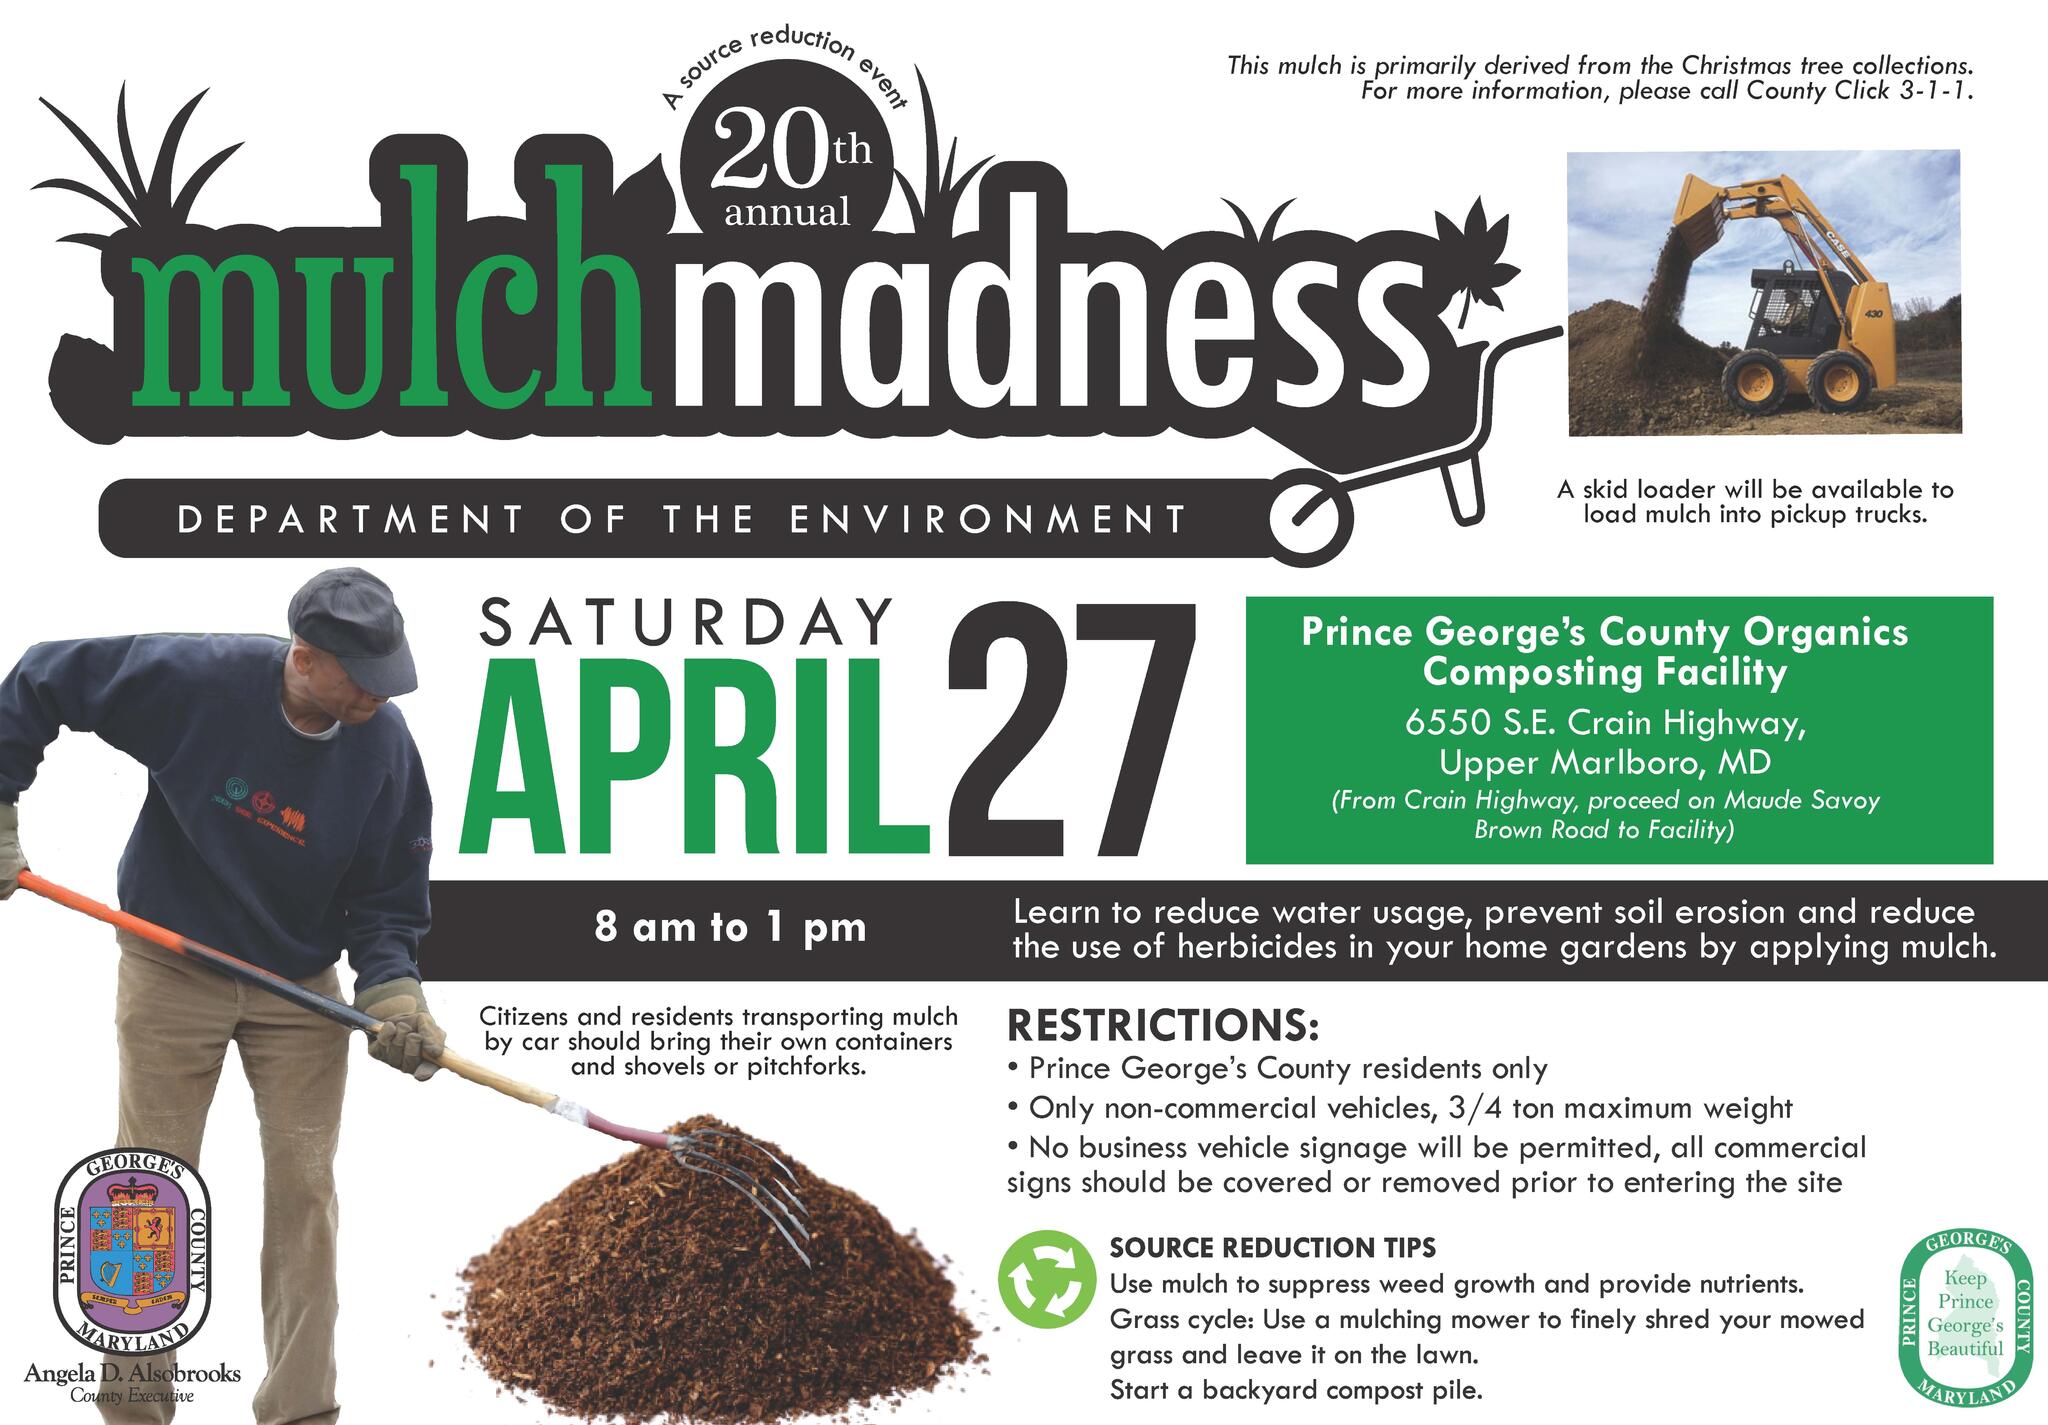 Mulch Madness 20th Anniversary FREE for County residents (Prince